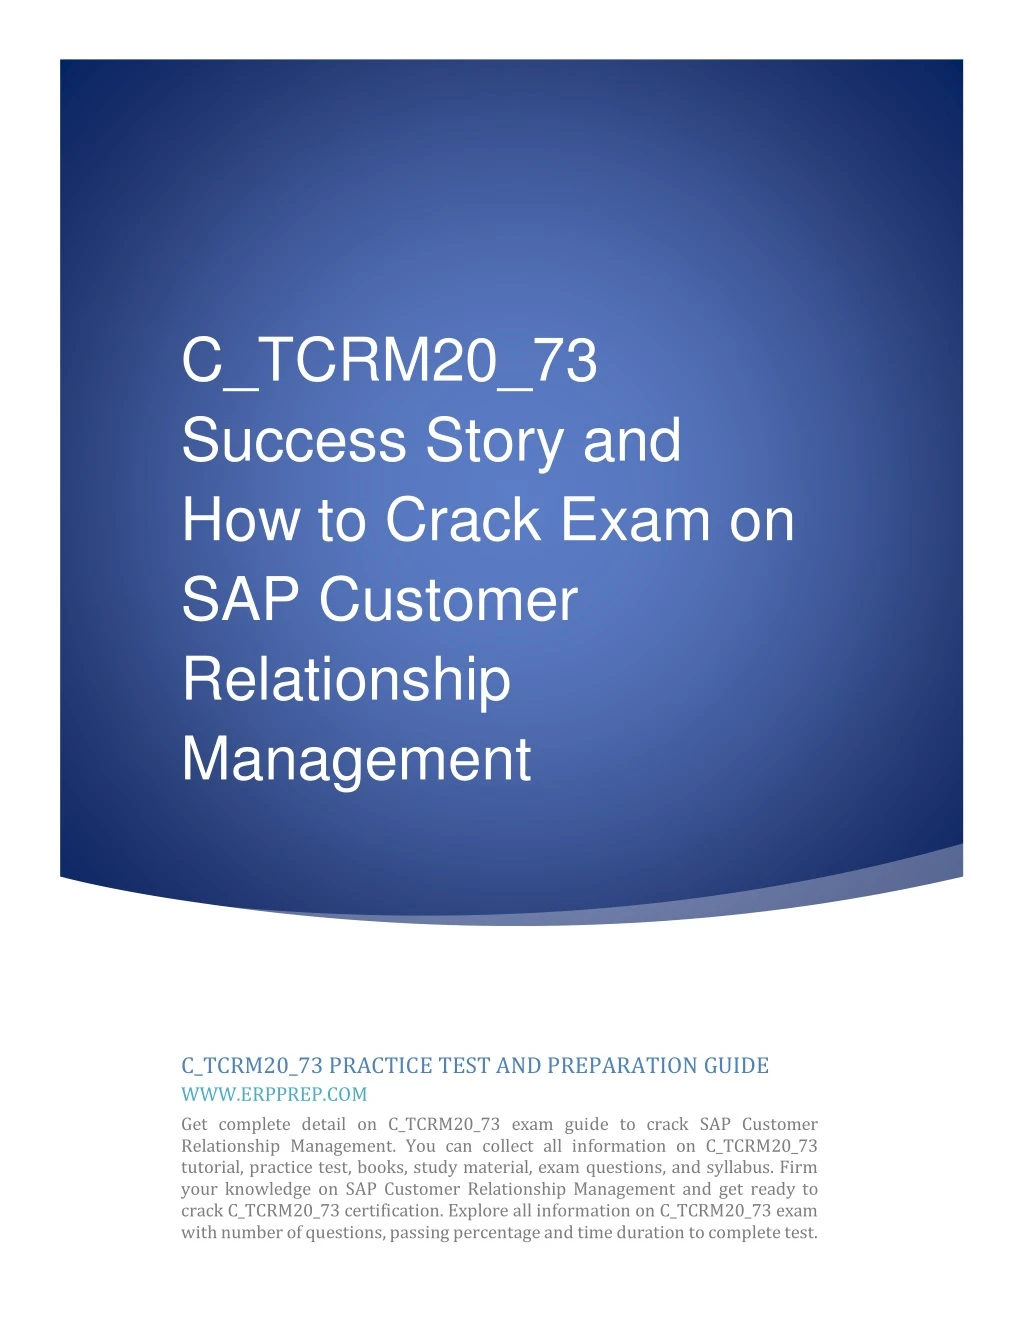 c tcrm20 73 success story and how to crack exam